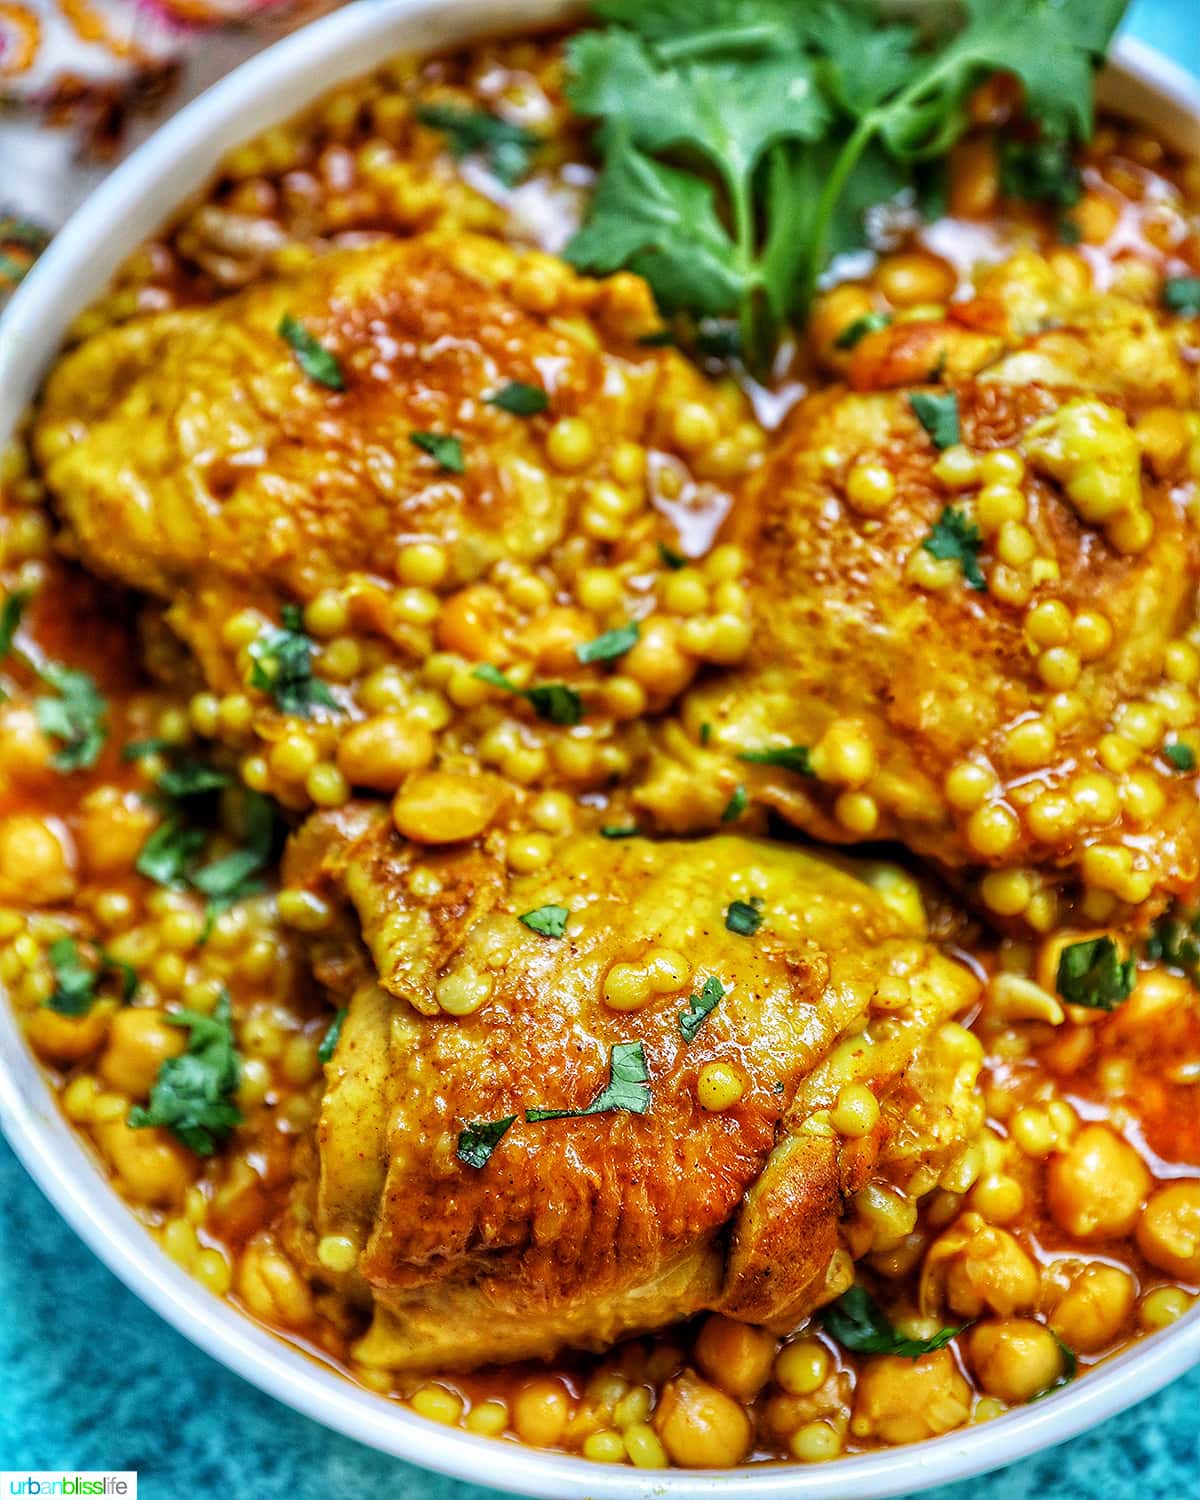 Moroccan Chicken Couscous Recipe - Stephanie Kay Nutrition